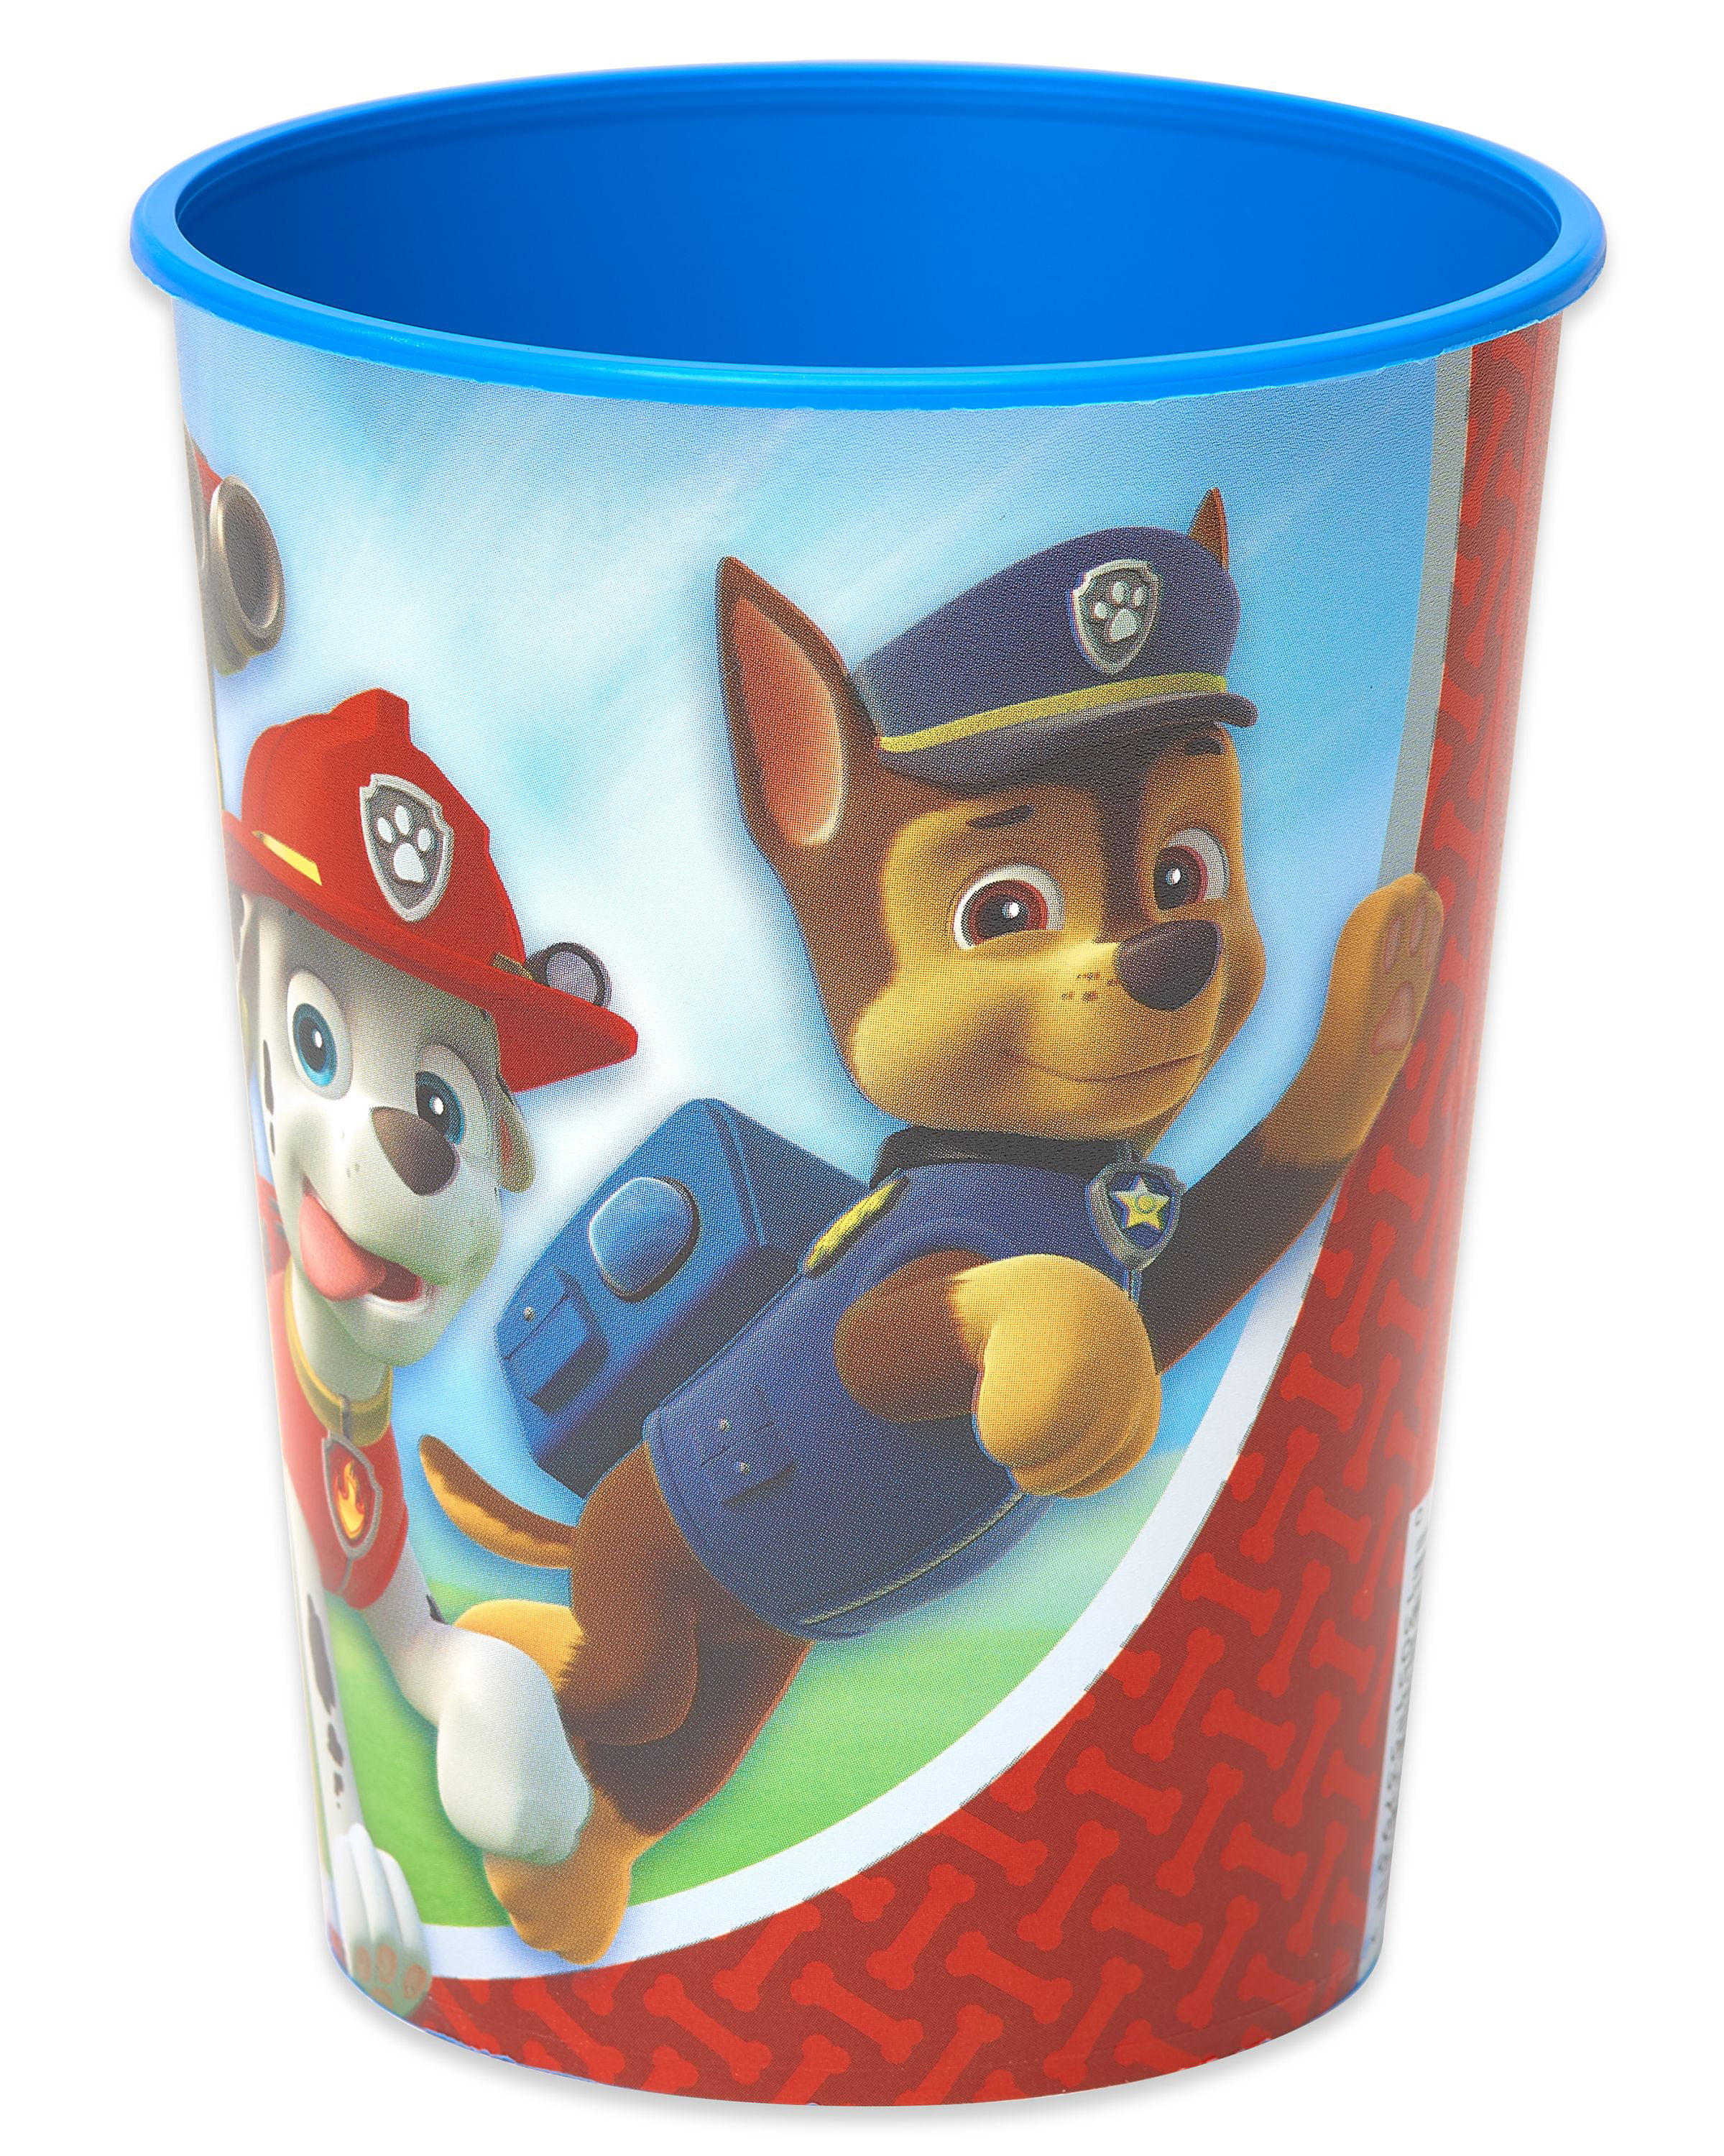 American Greetings Paw Patrol Pink Reusable Plastic Party Cups, 12